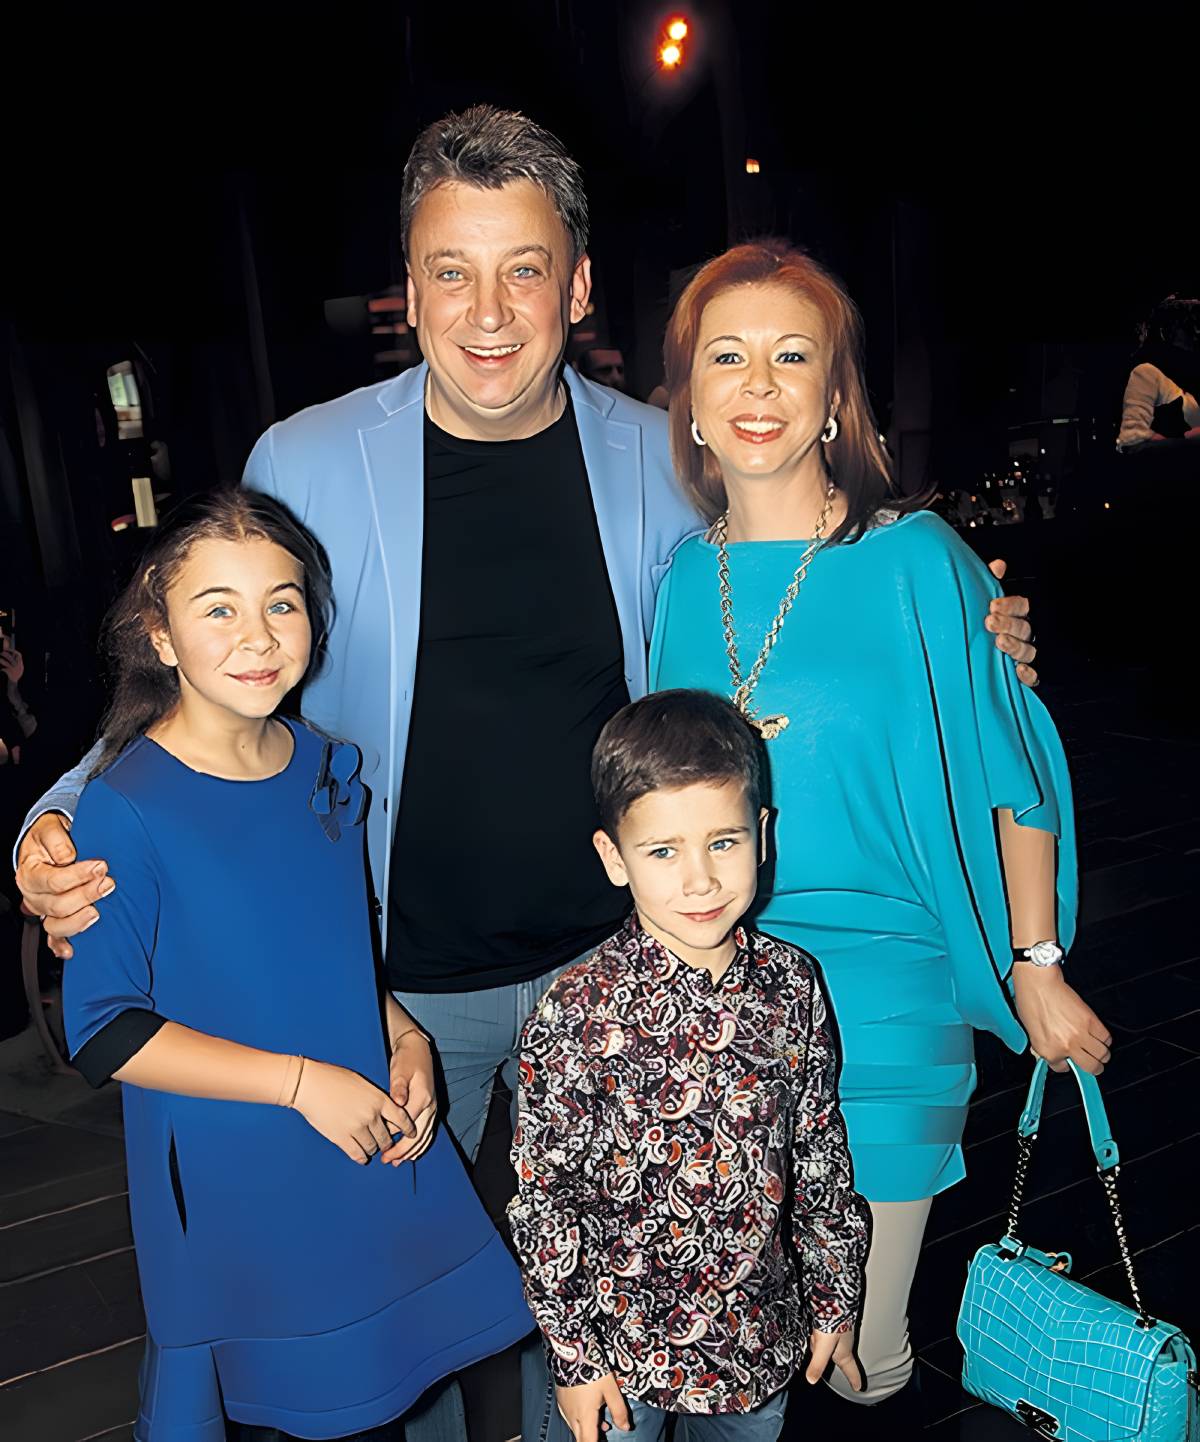 Dmitry Galkin and his family